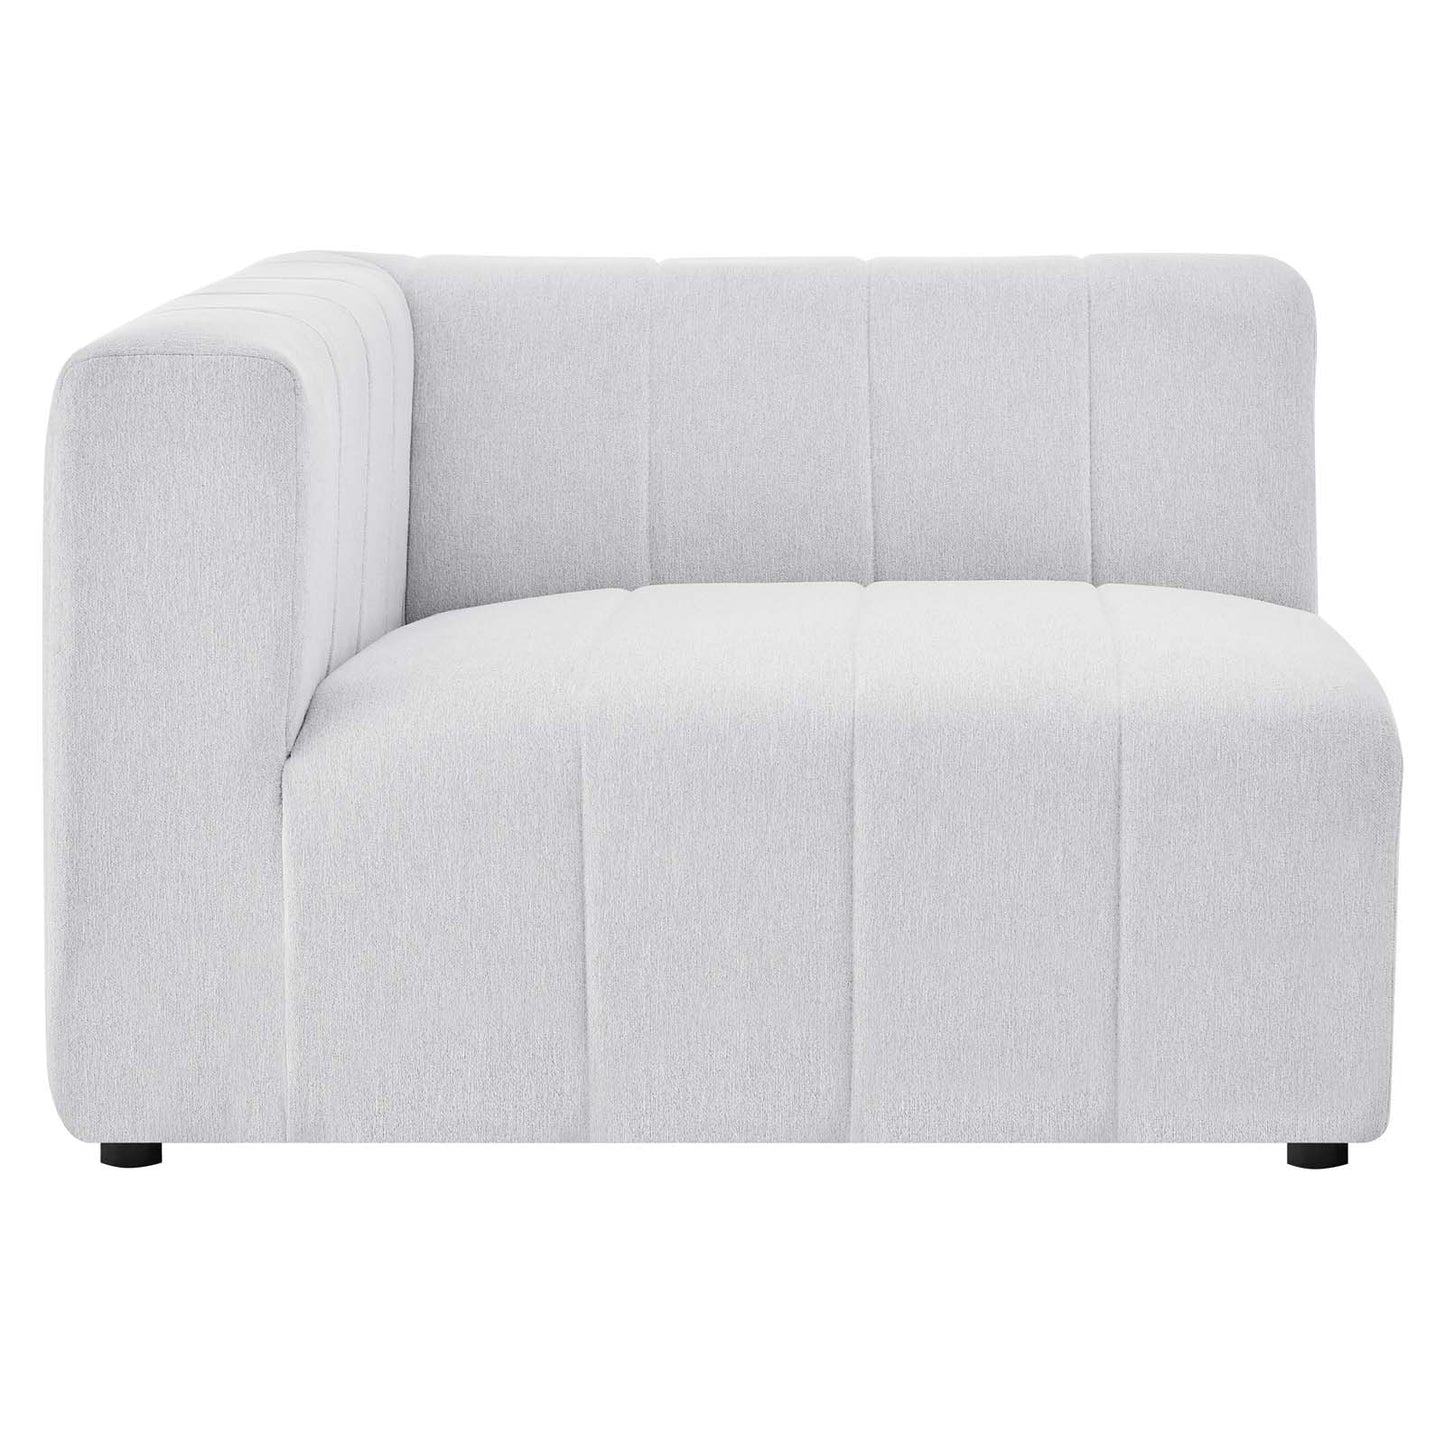 Bartlett Upholstered Fabric 8-Piece Sectional Sofa Ivory EEI-4535-IVO